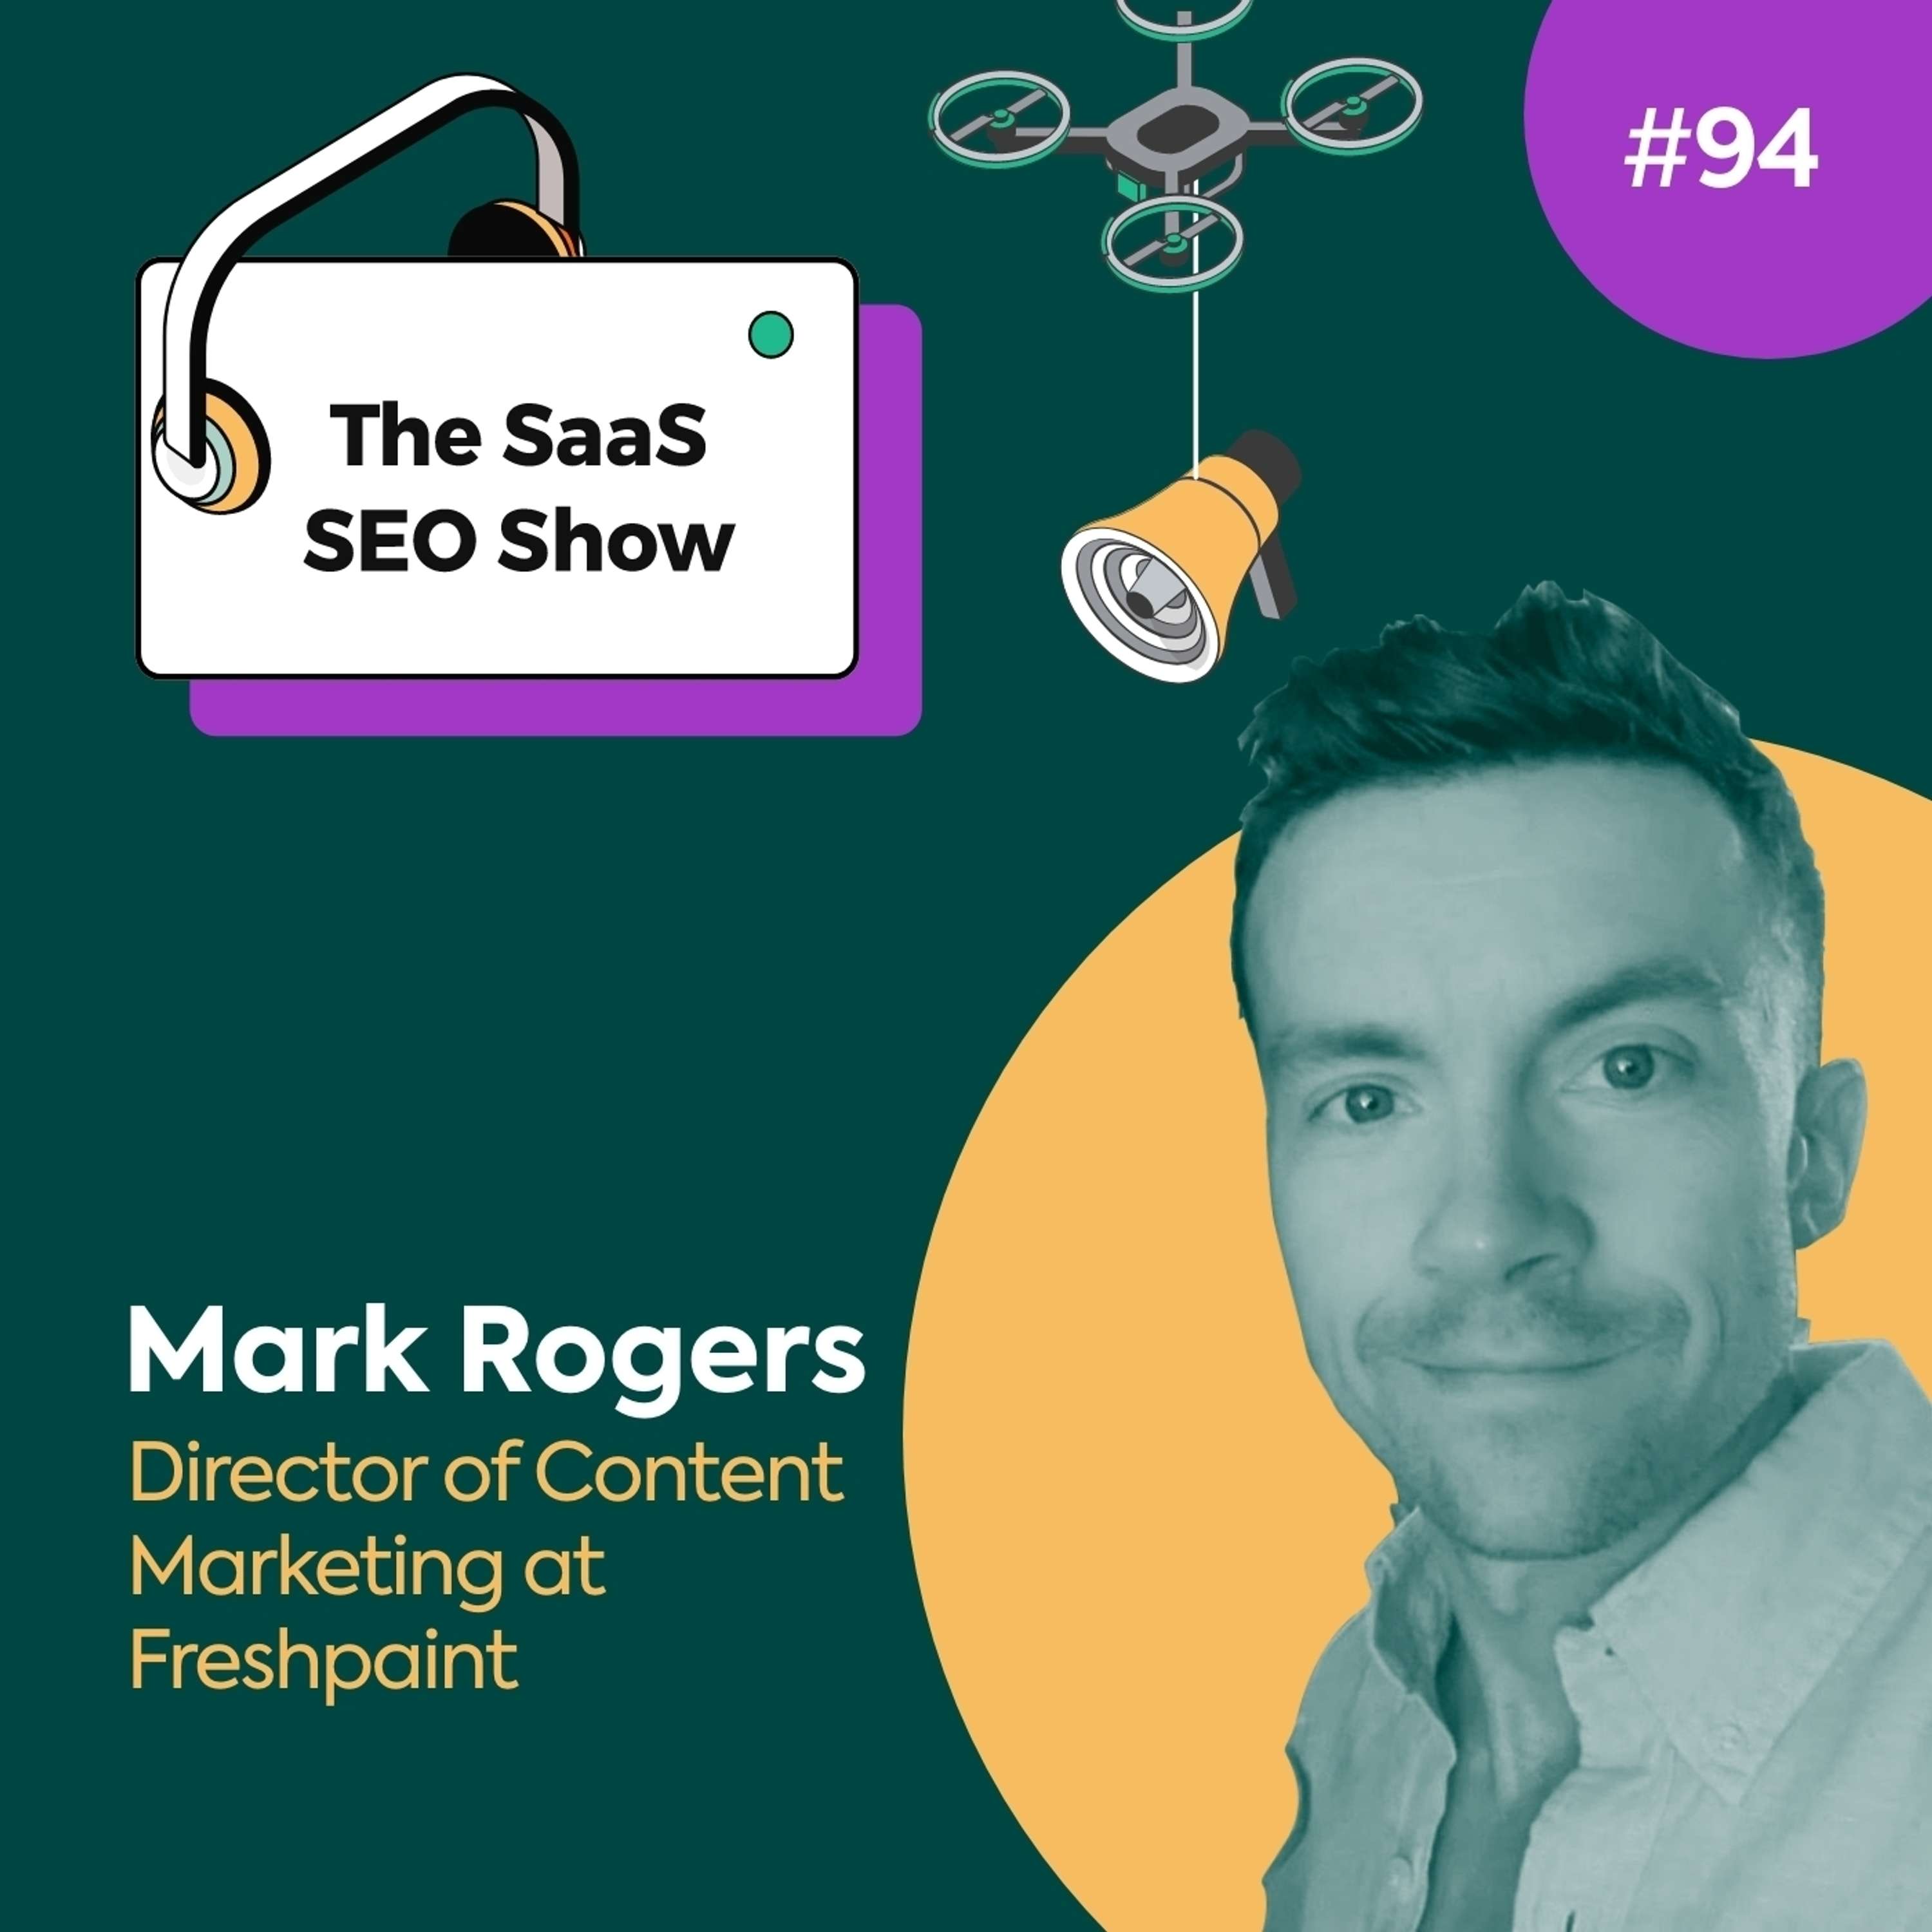 Content Strategy for Healthcare with Mark Rogers, Director of Content Marketing at Freshpaint #94